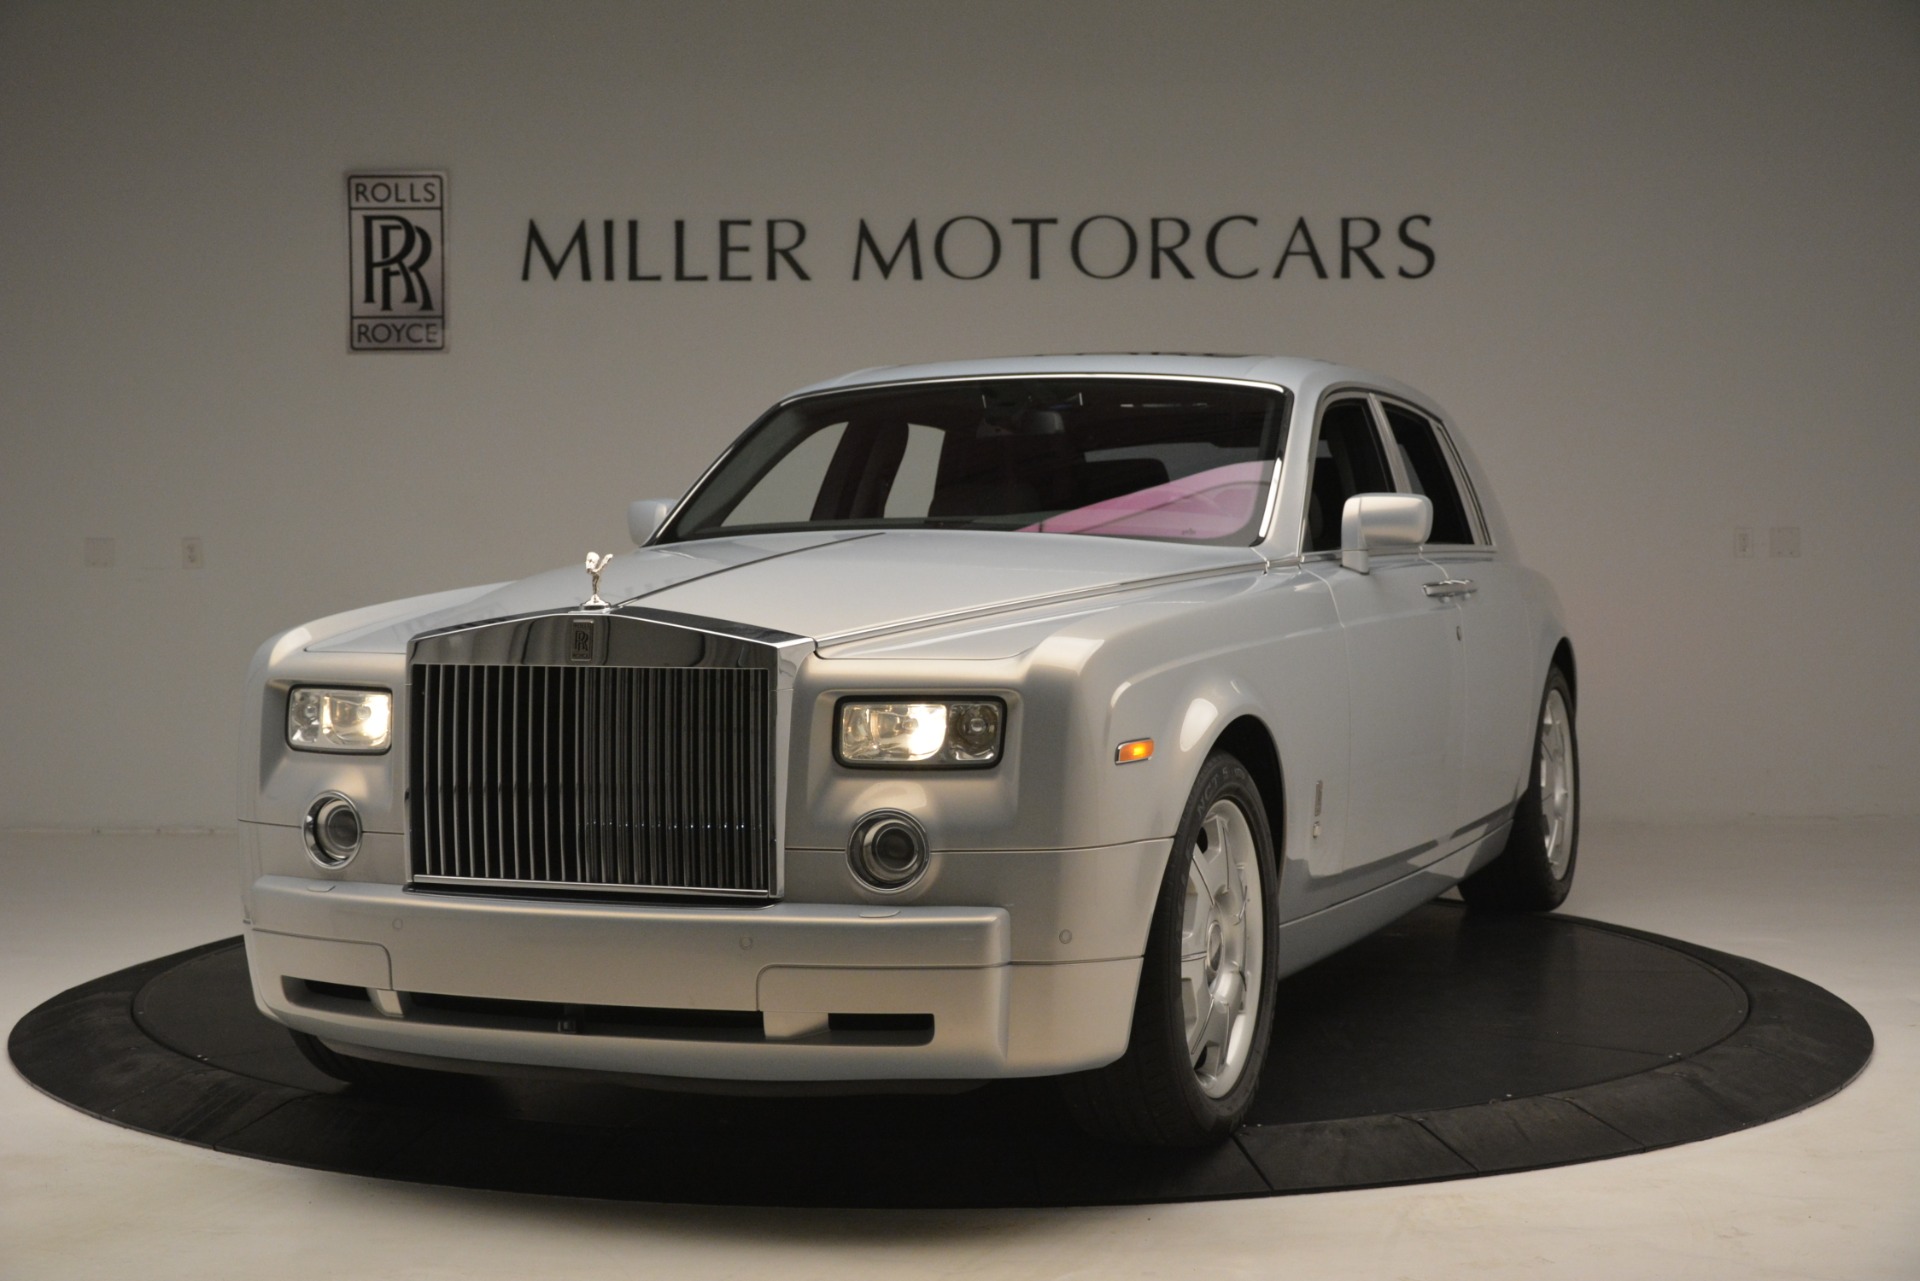 Used 2007 Rolls-Royce Phantom for sale Sold at Bentley Greenwich in Greenwich CT 06830 1